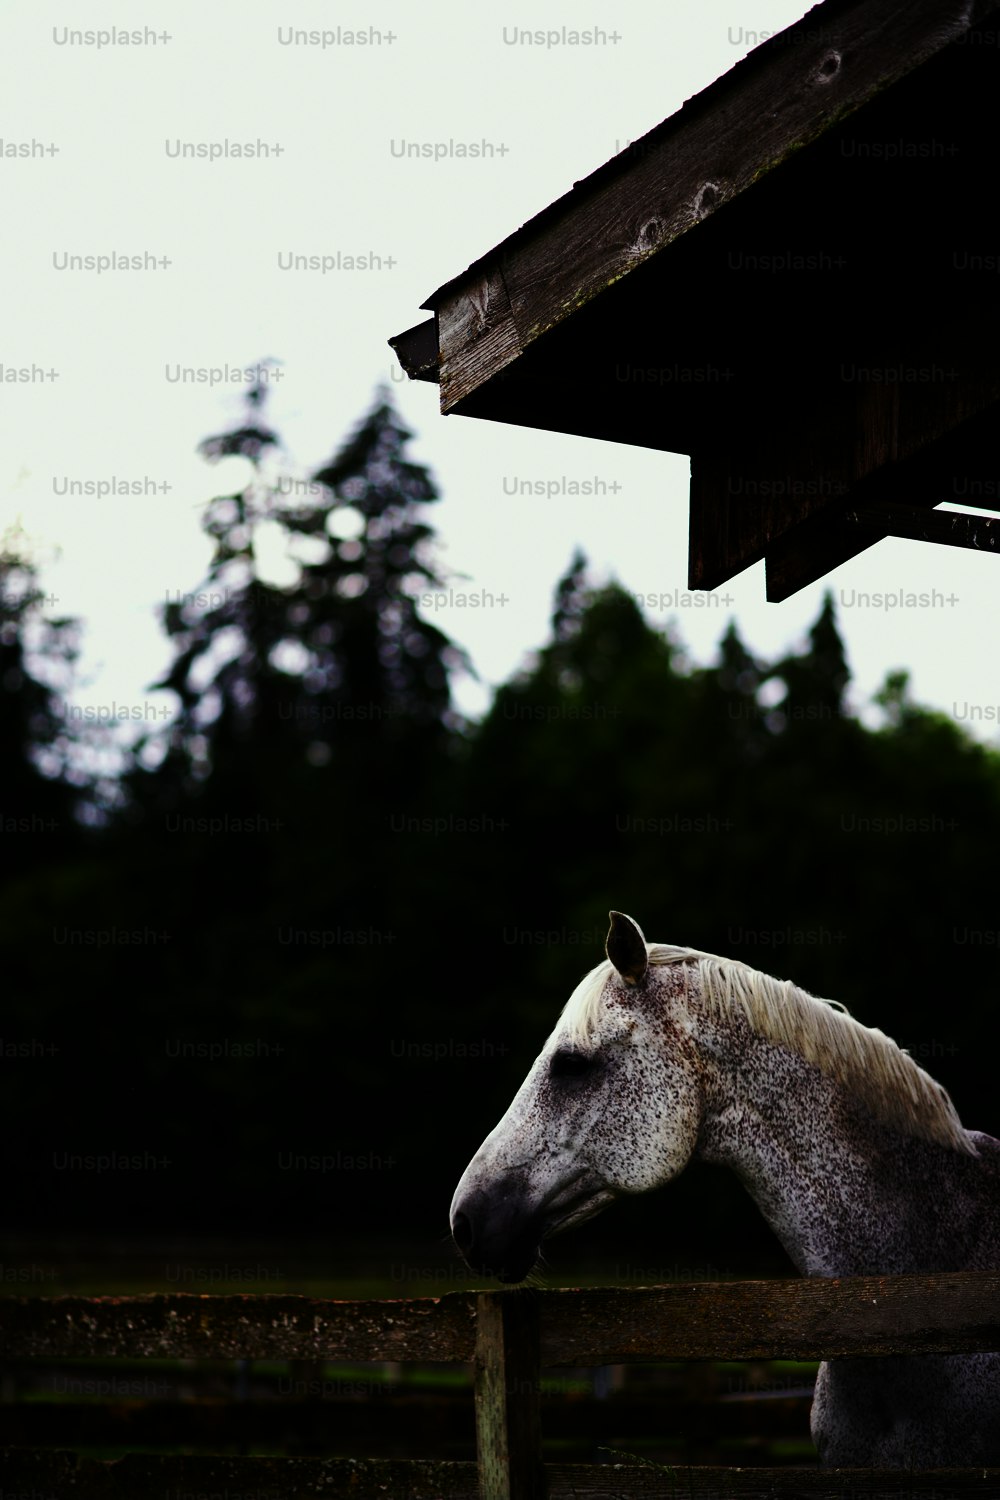 a white horse standing next to a wooden fence